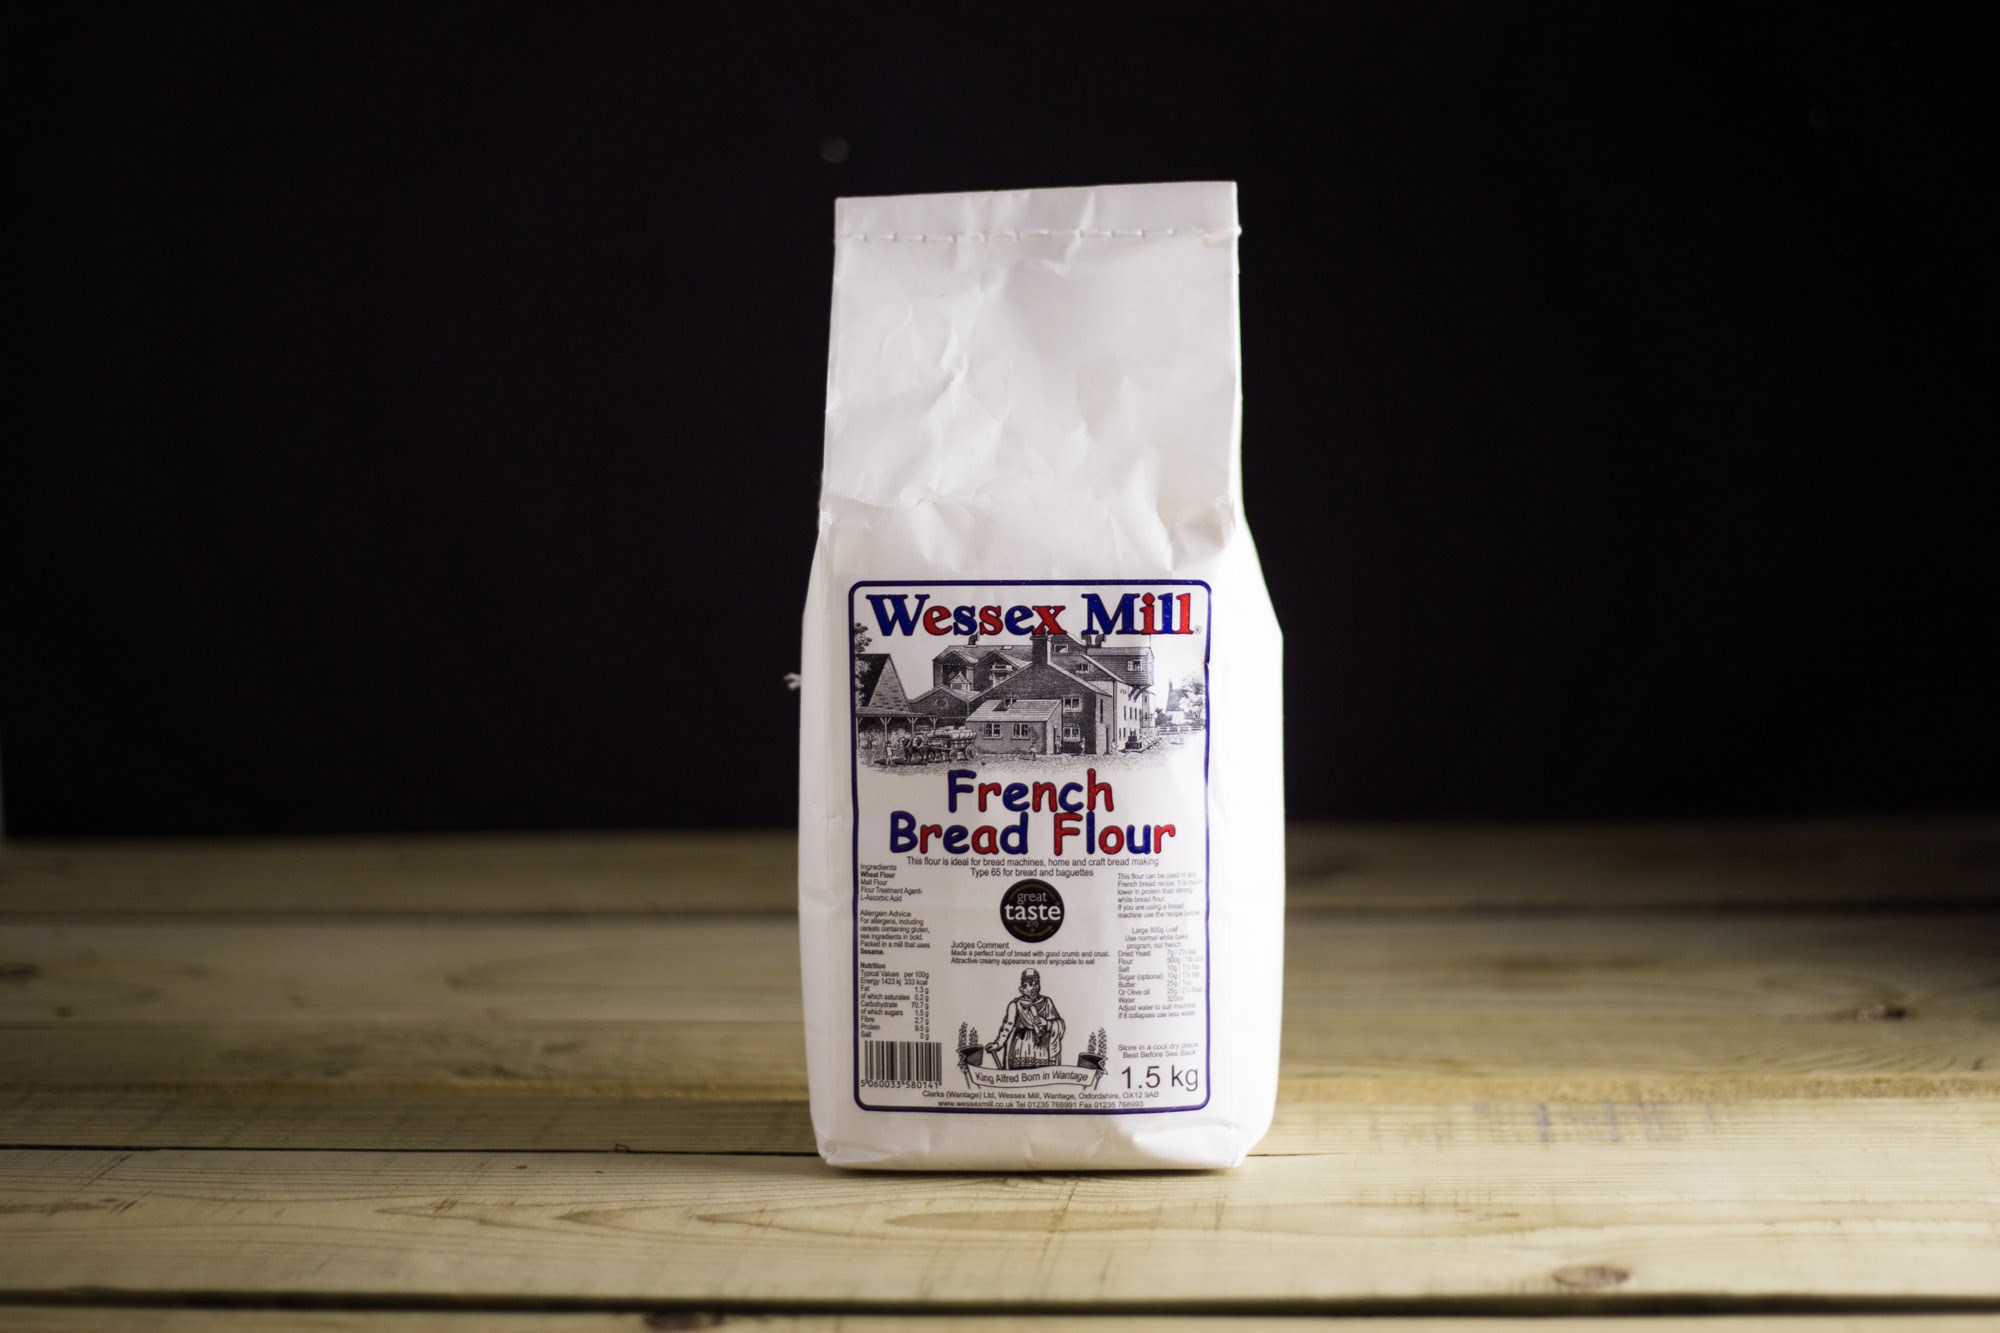 Wessex Mill French Bread flour